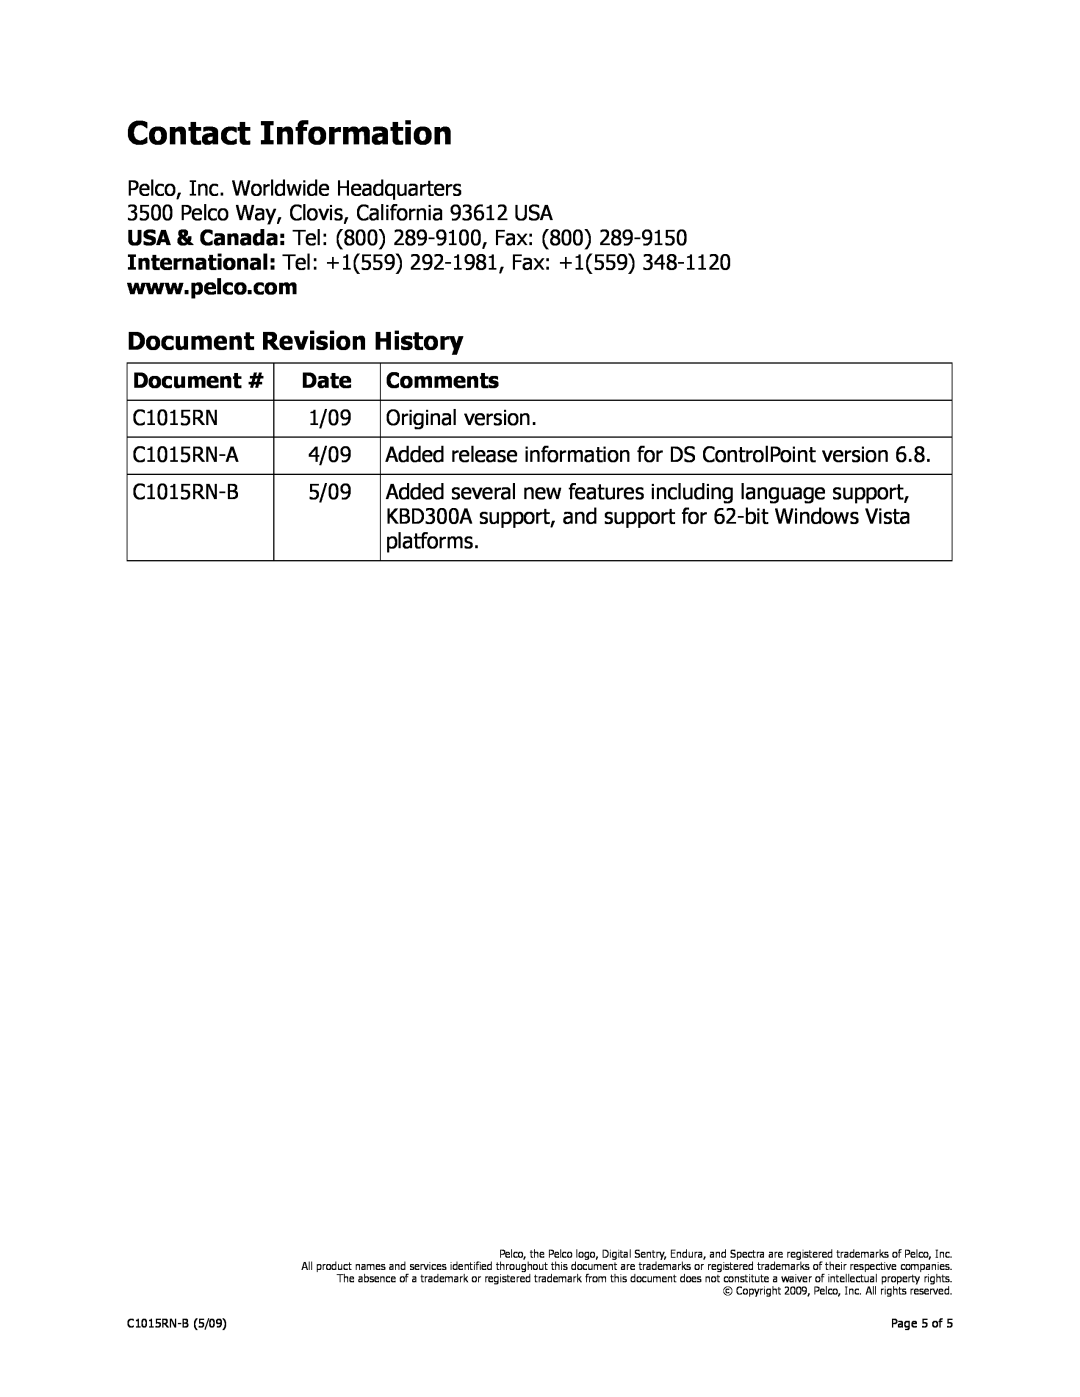 Pelco 1.6 operation manual Contact Information, Document Revision History, Document #, Date, Comments 